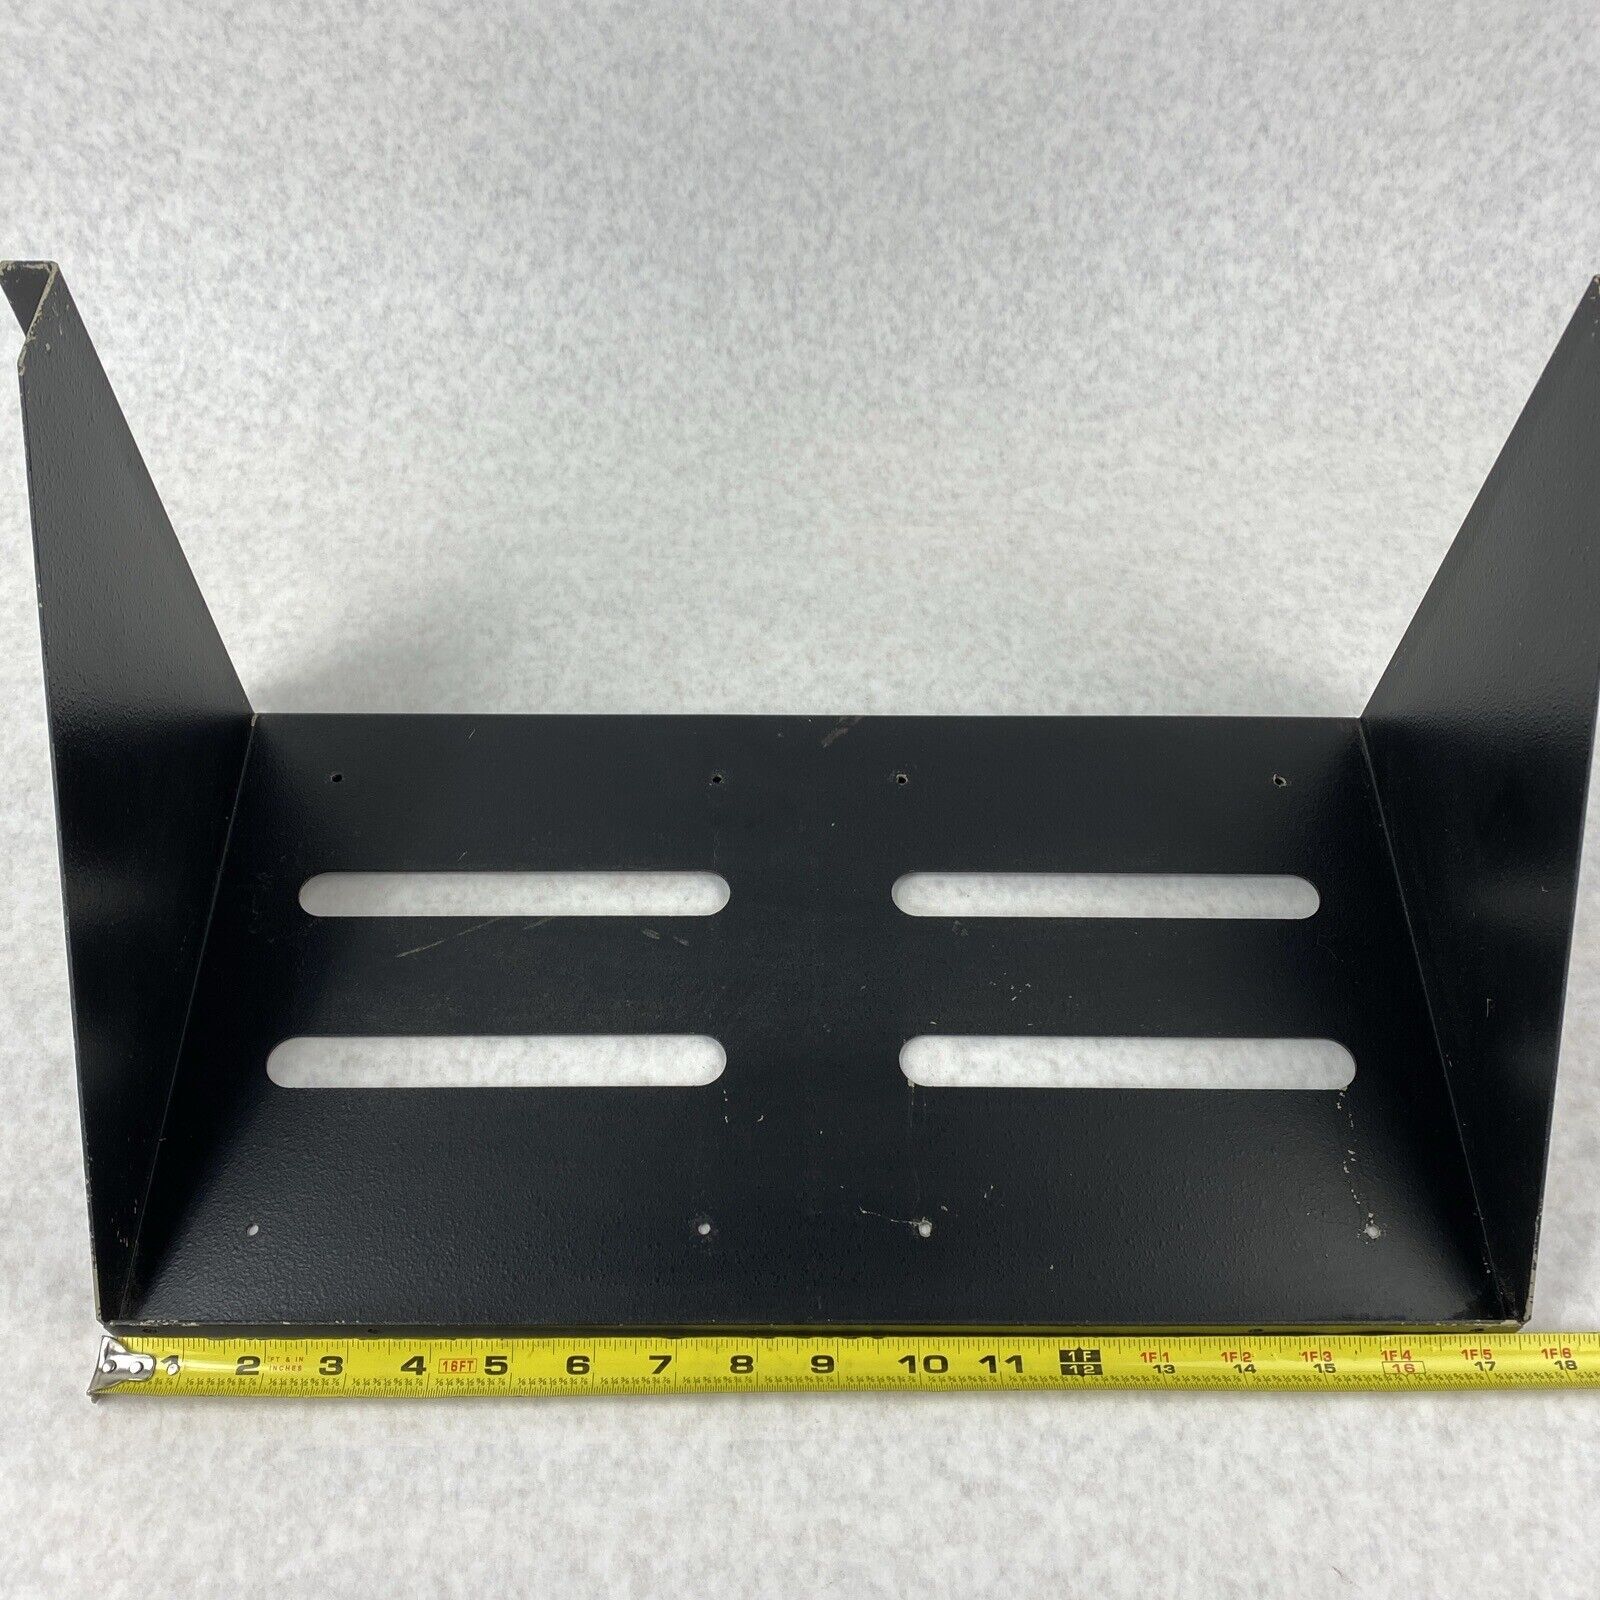 Wall Mount Shelf Black Scratched 17.25 x 9.5 x 8.5" Tray for Two 8" CRT